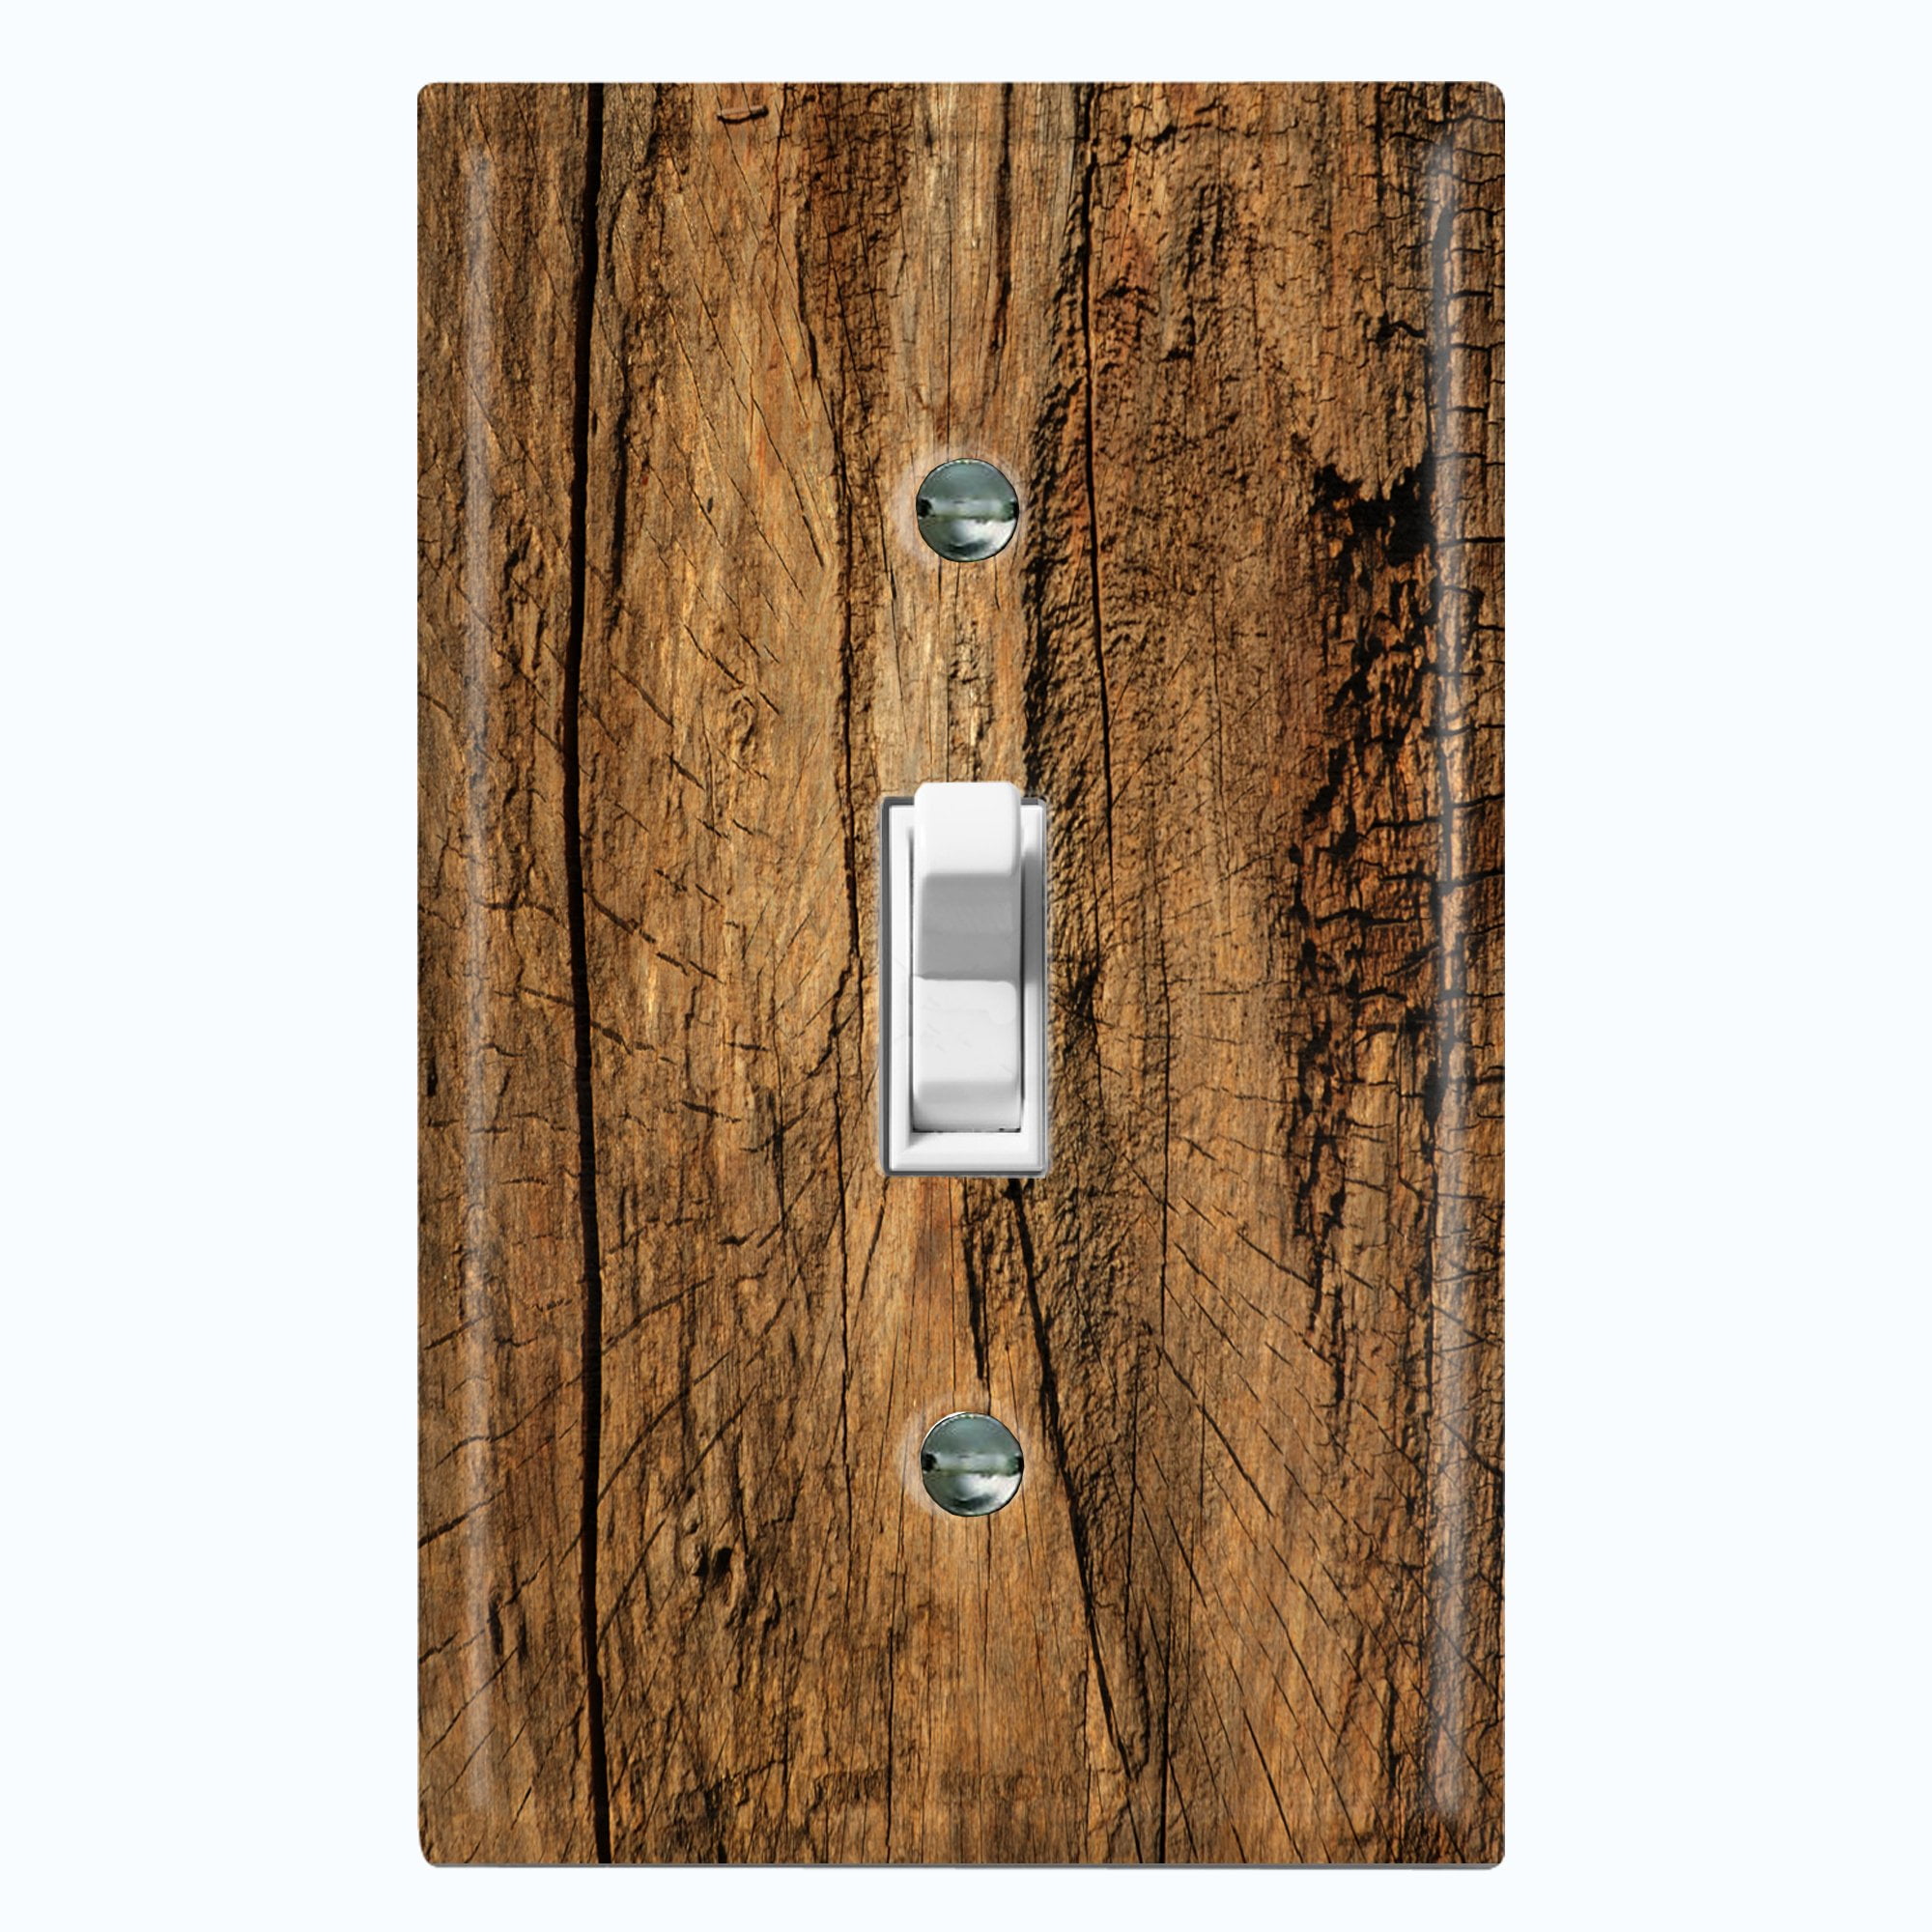 Triple Moose & Pine Trees Single GFI Switch and Outlet Cover CUSTOM Pr —  Village Wrought Iron Inc